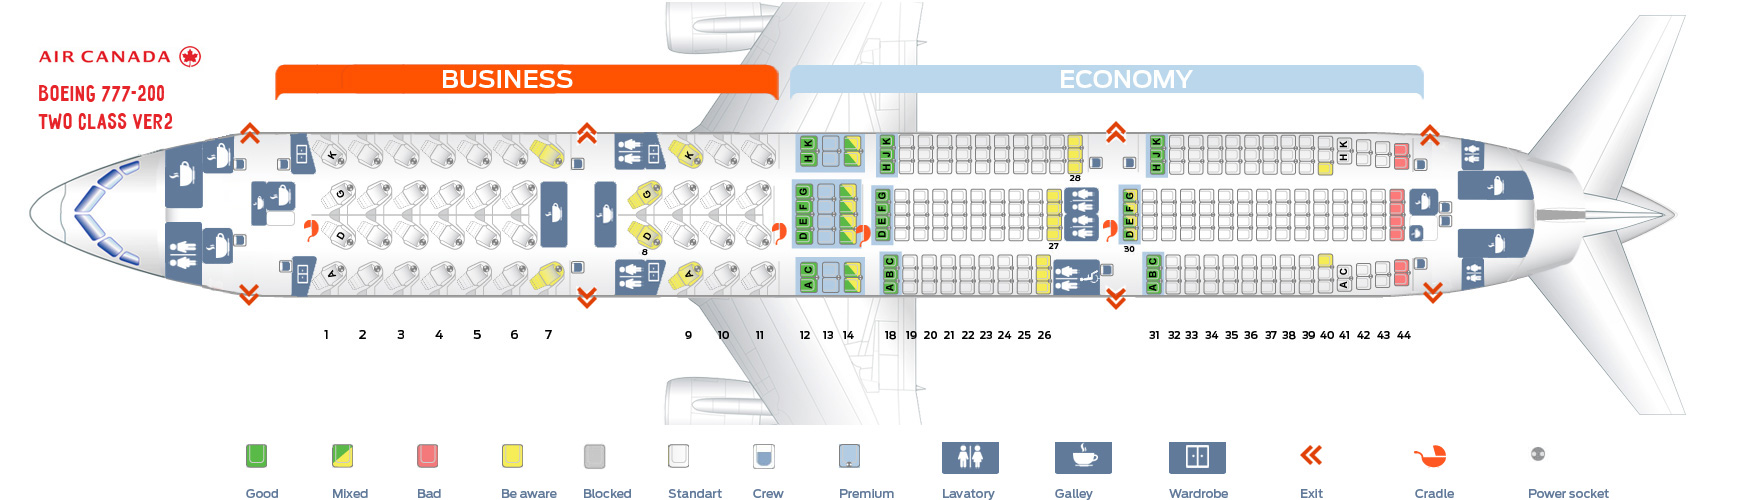 Seat map Air Canada Boeing-777-200 Two Class version 2